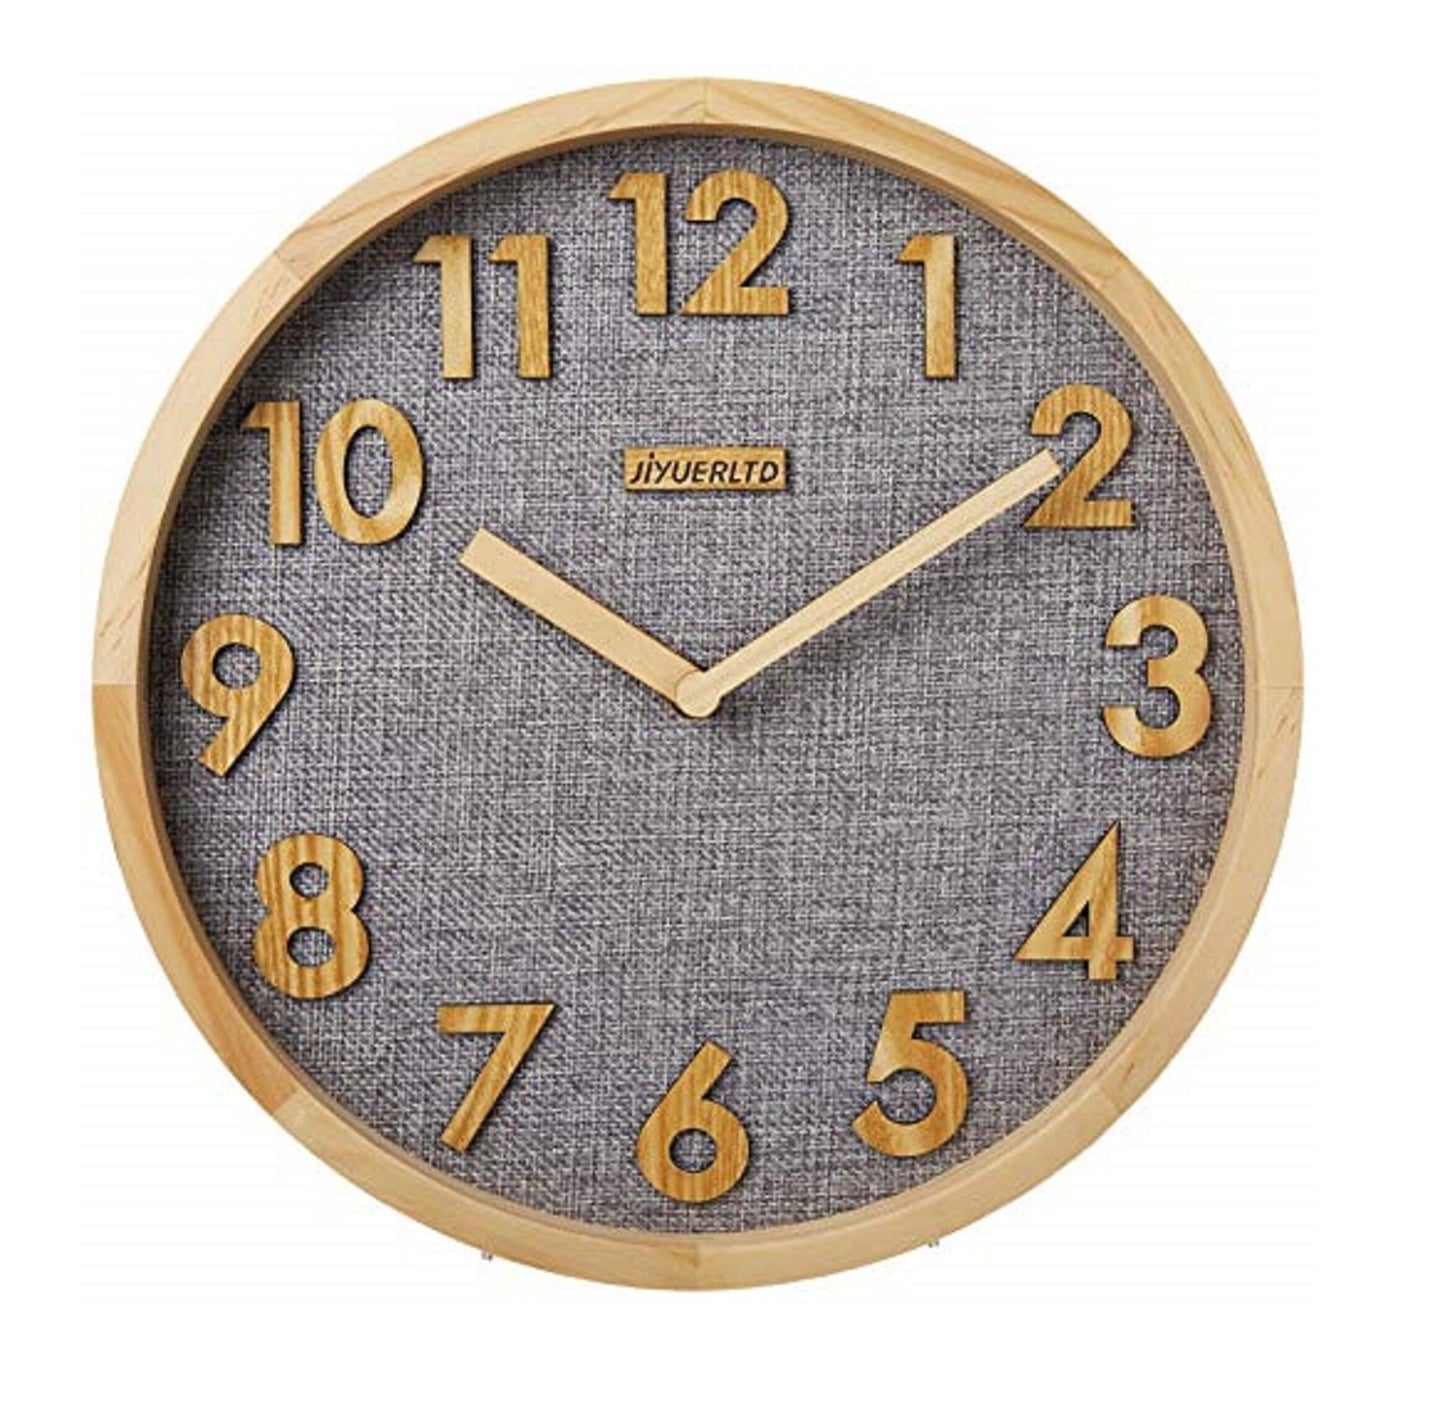 JIYUERLTD Silent Wall Clock 12In Kitchen Clock with 3D Wood Numbers, Non-Ticking Quartz Movement, Linen Face and Wood Frame for Home, Office, Classroom(Gray)